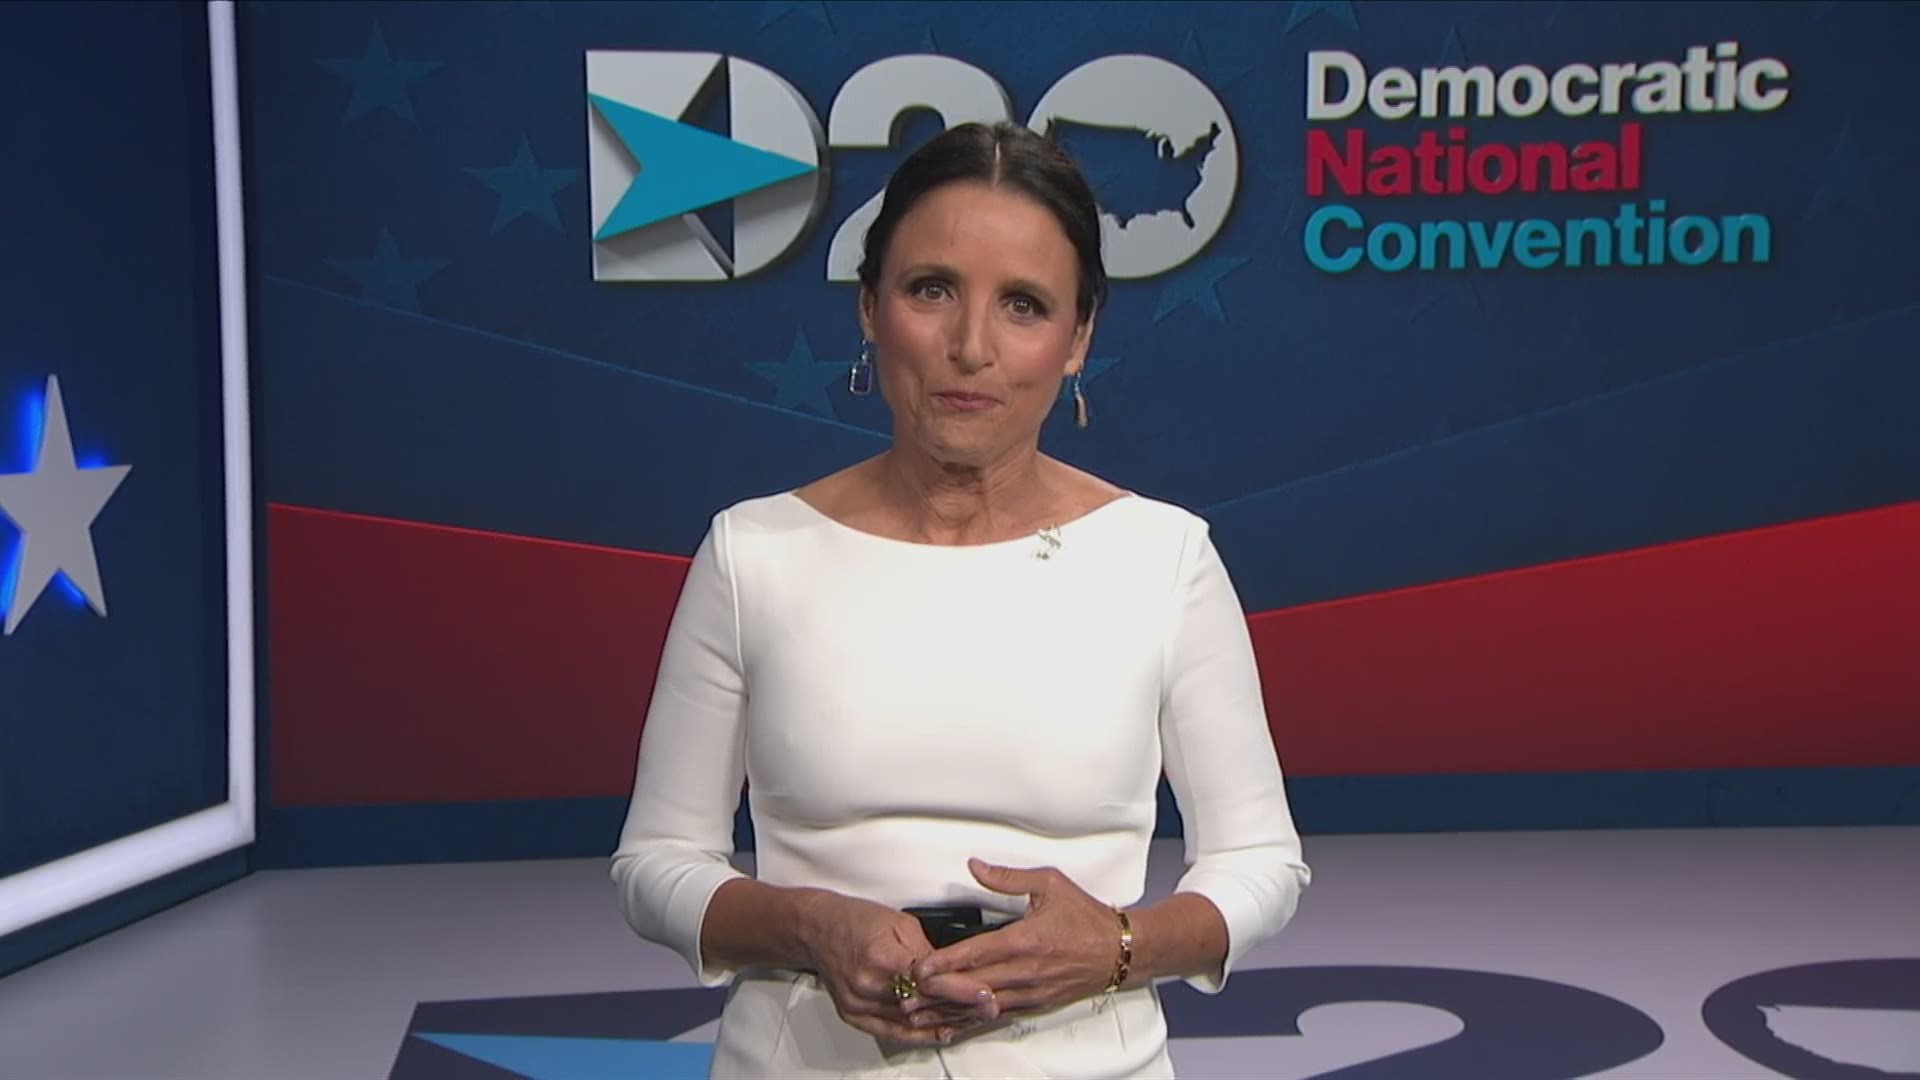 'Veep' star Julia Louis Dreyfus opened the final night of the Democratic National Convention with a personal story of Joe Biden and subtle digs at President Trump.